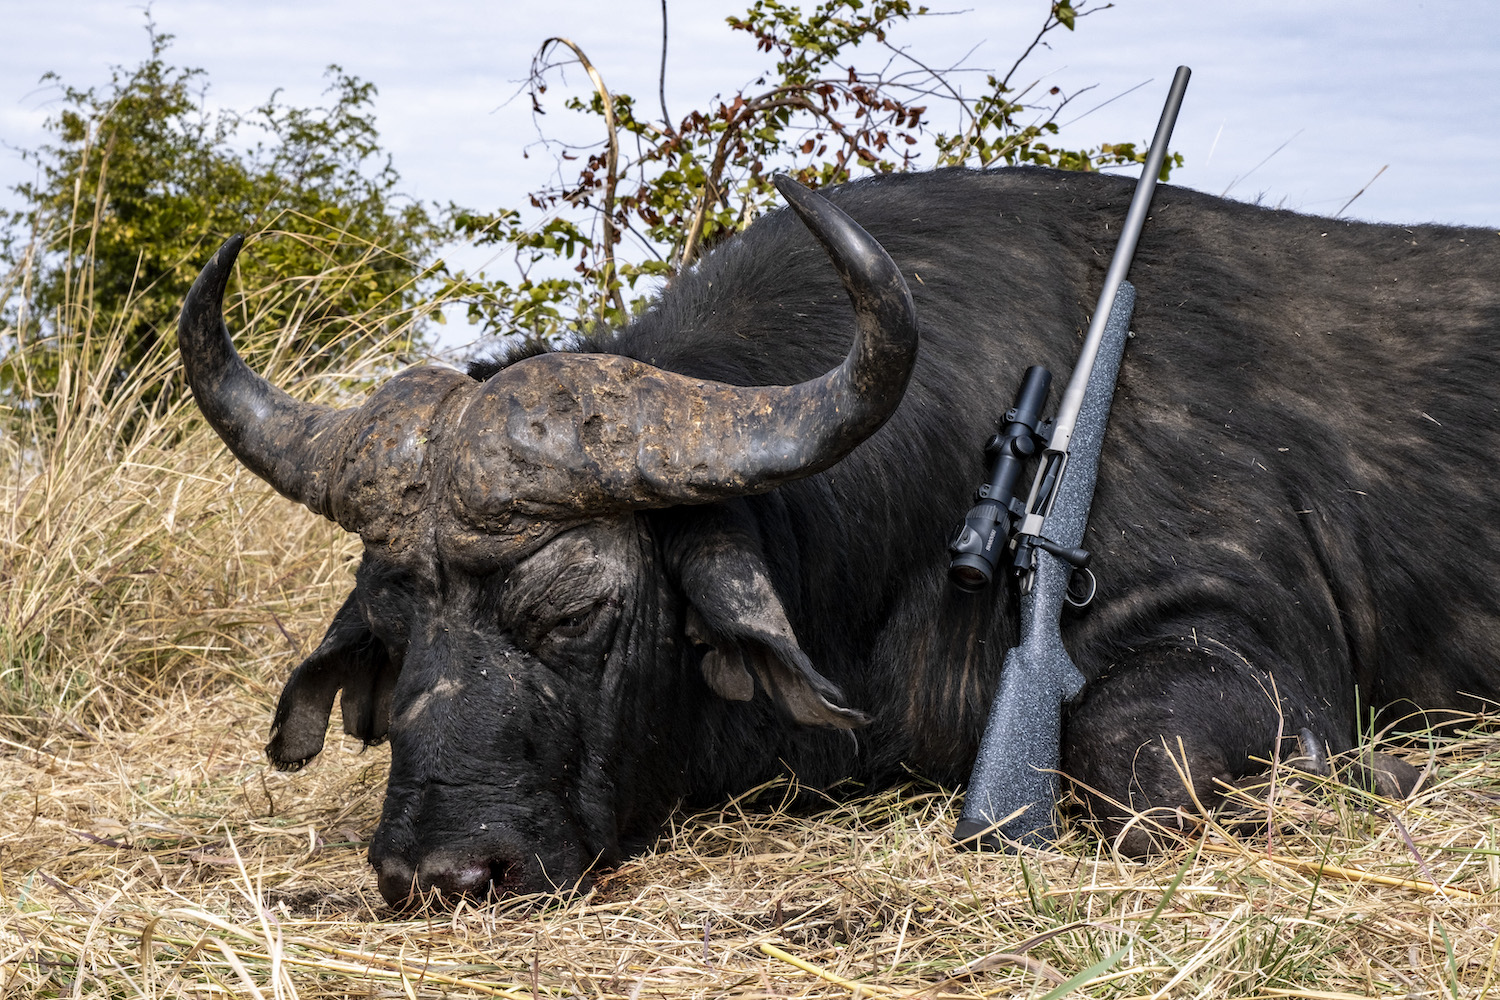 Cape buffalo with Nosler 21 in .375 H&H